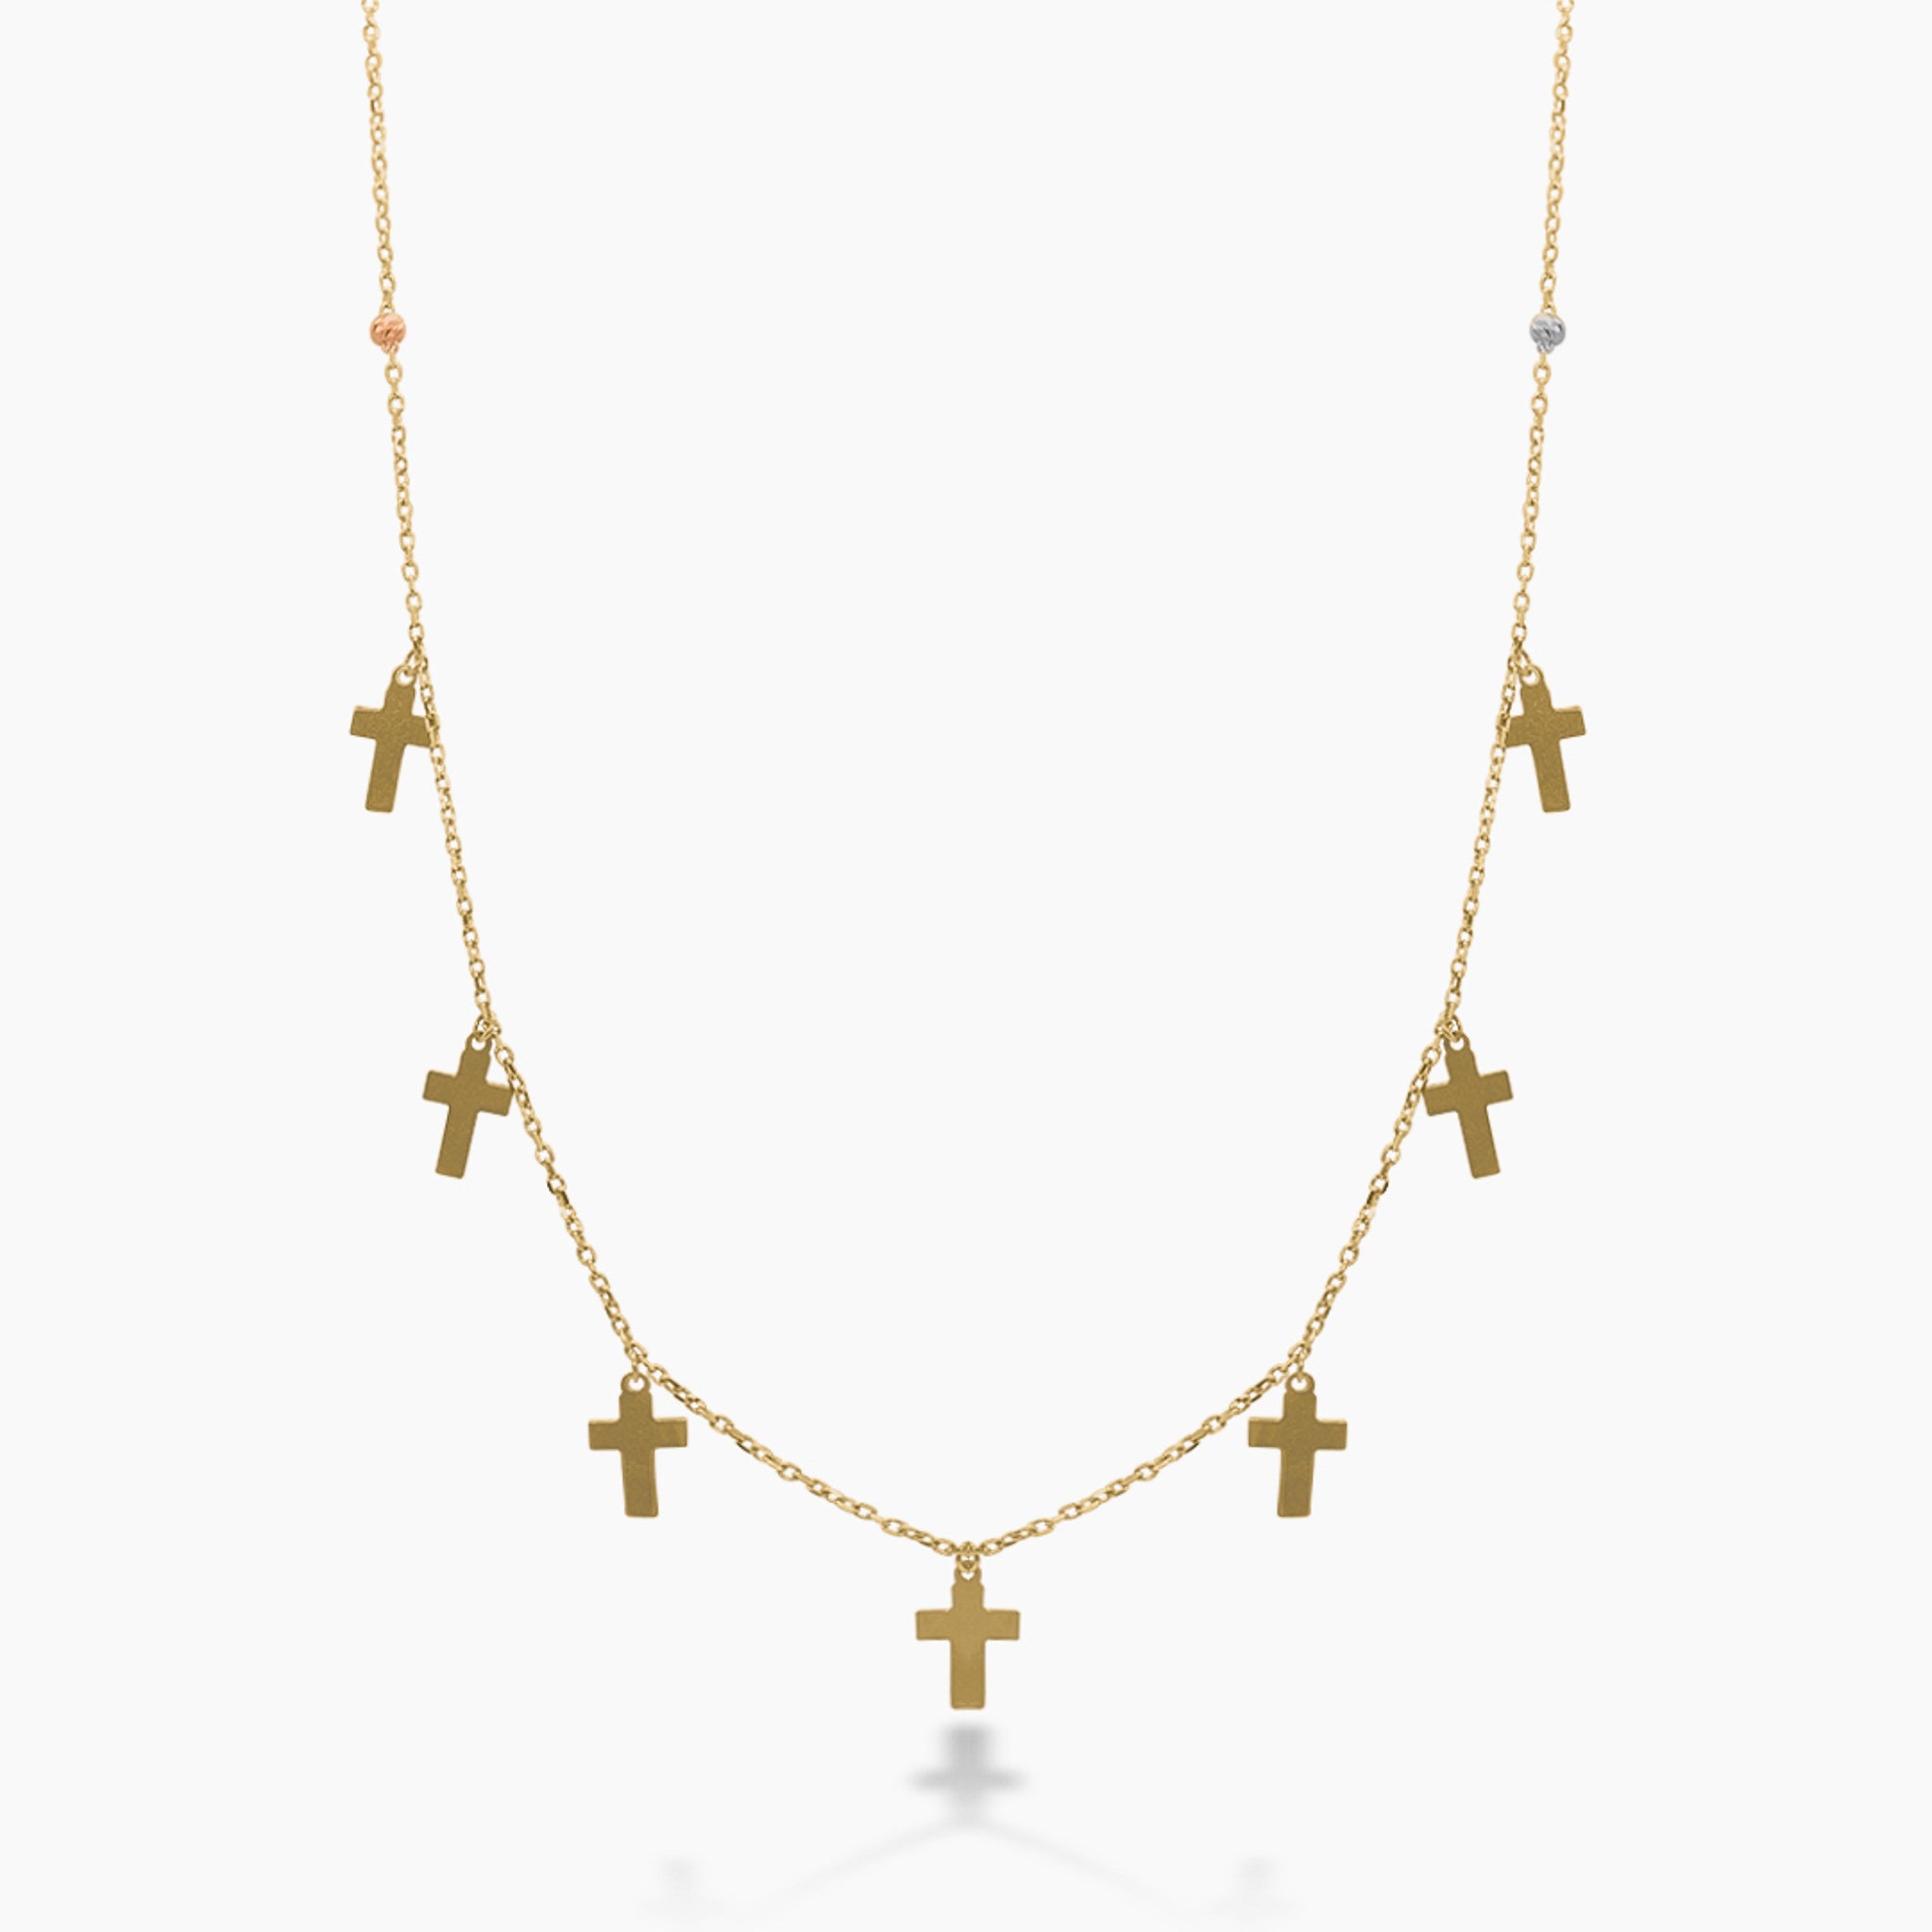 14K YELLOW GOLD DANGLING CROSSES NECKLACE